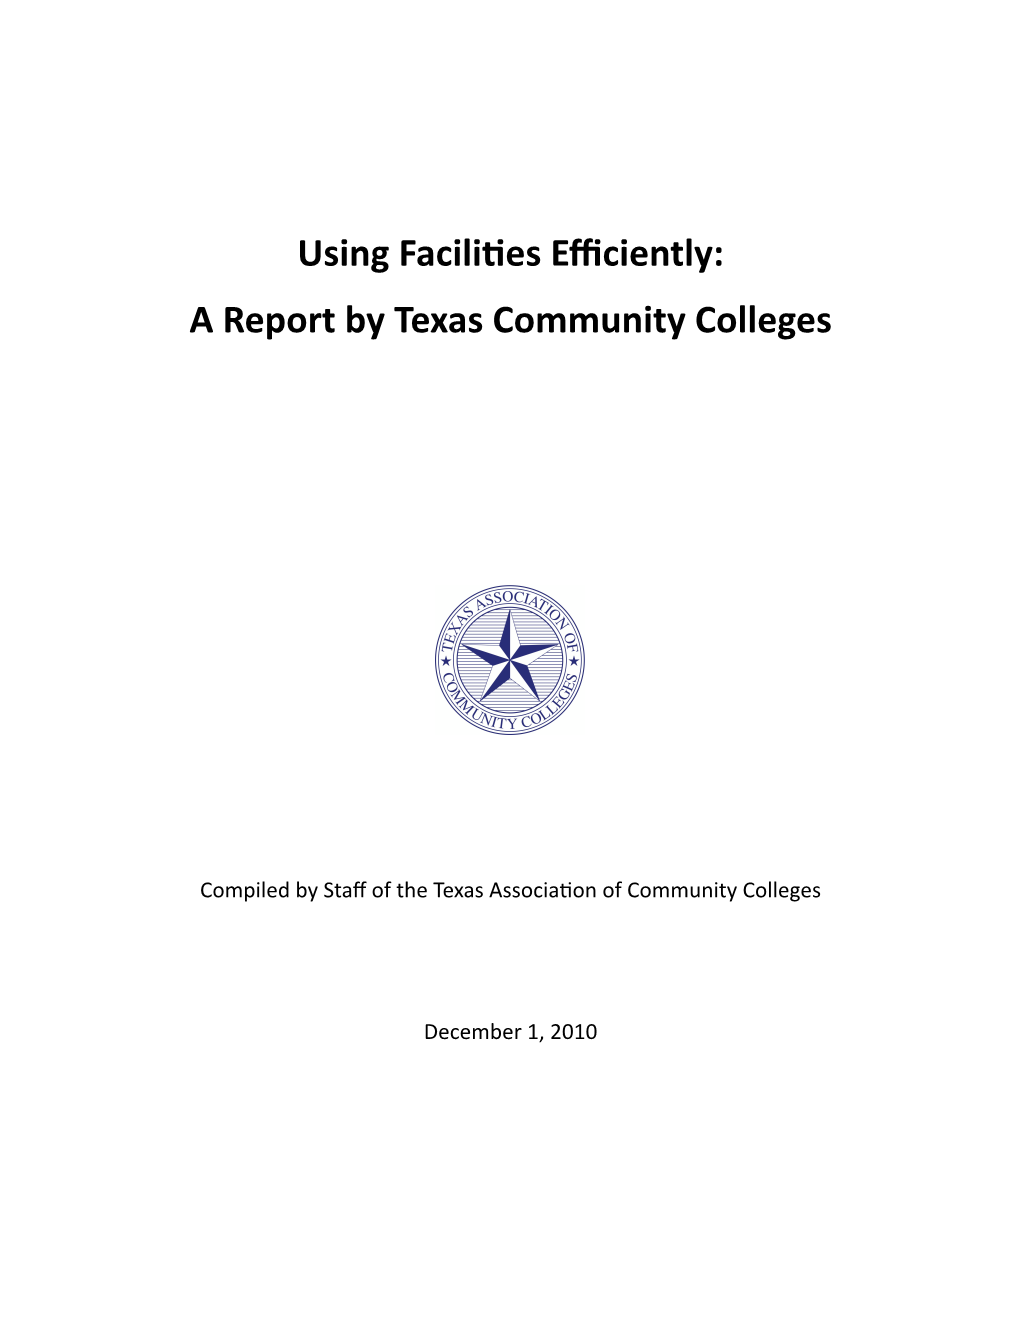 A Report by Texas Community Colleges